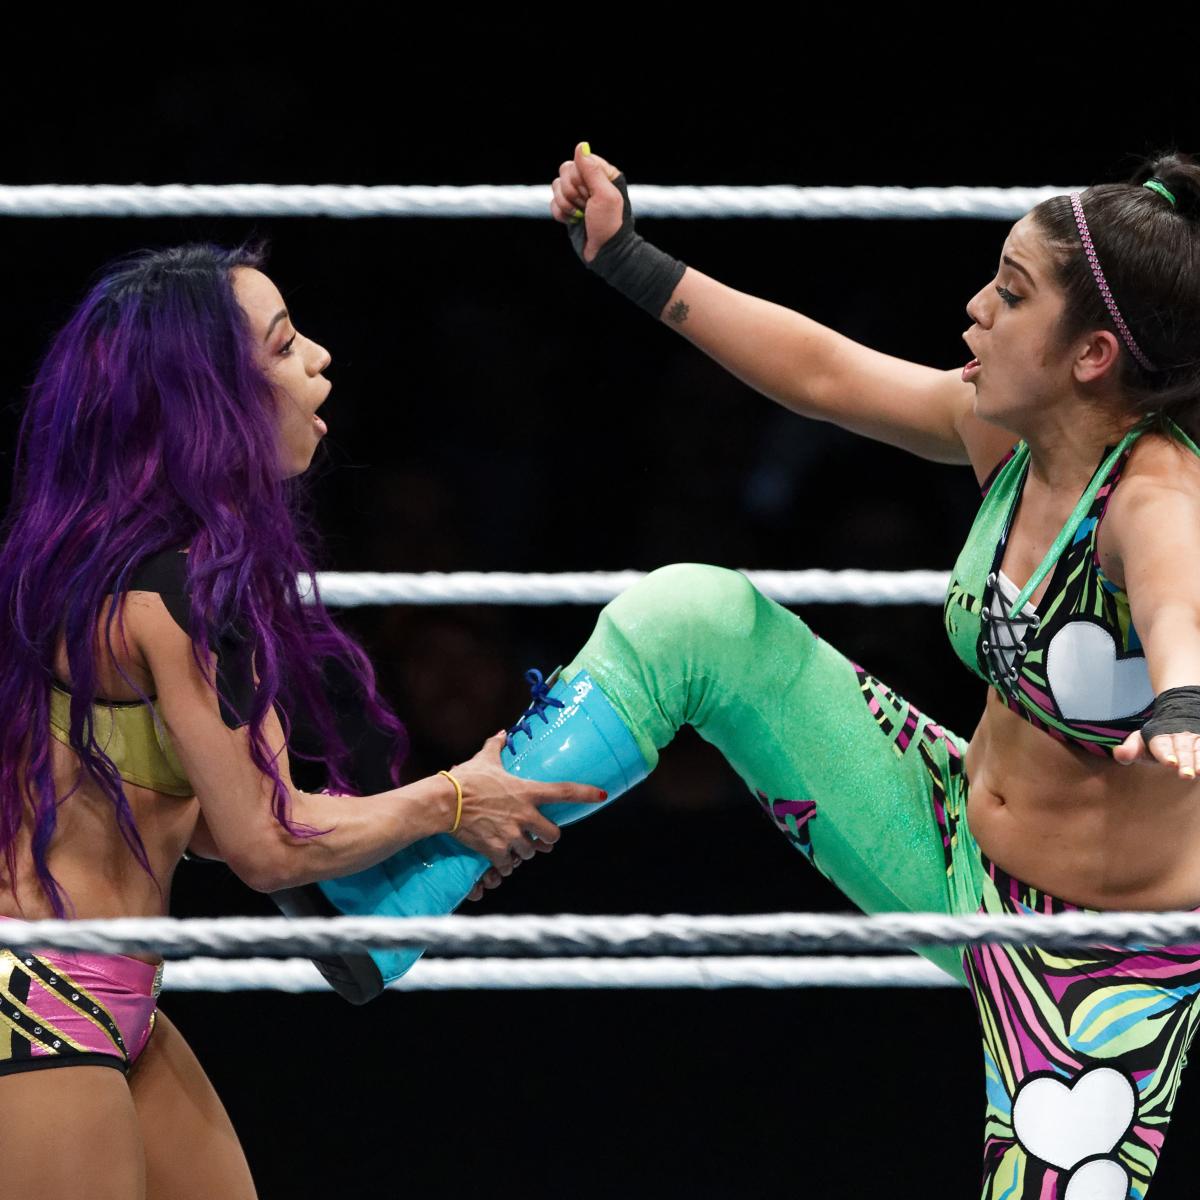 Women's champion Sasha Banks on NXT's growing popularity and her own success